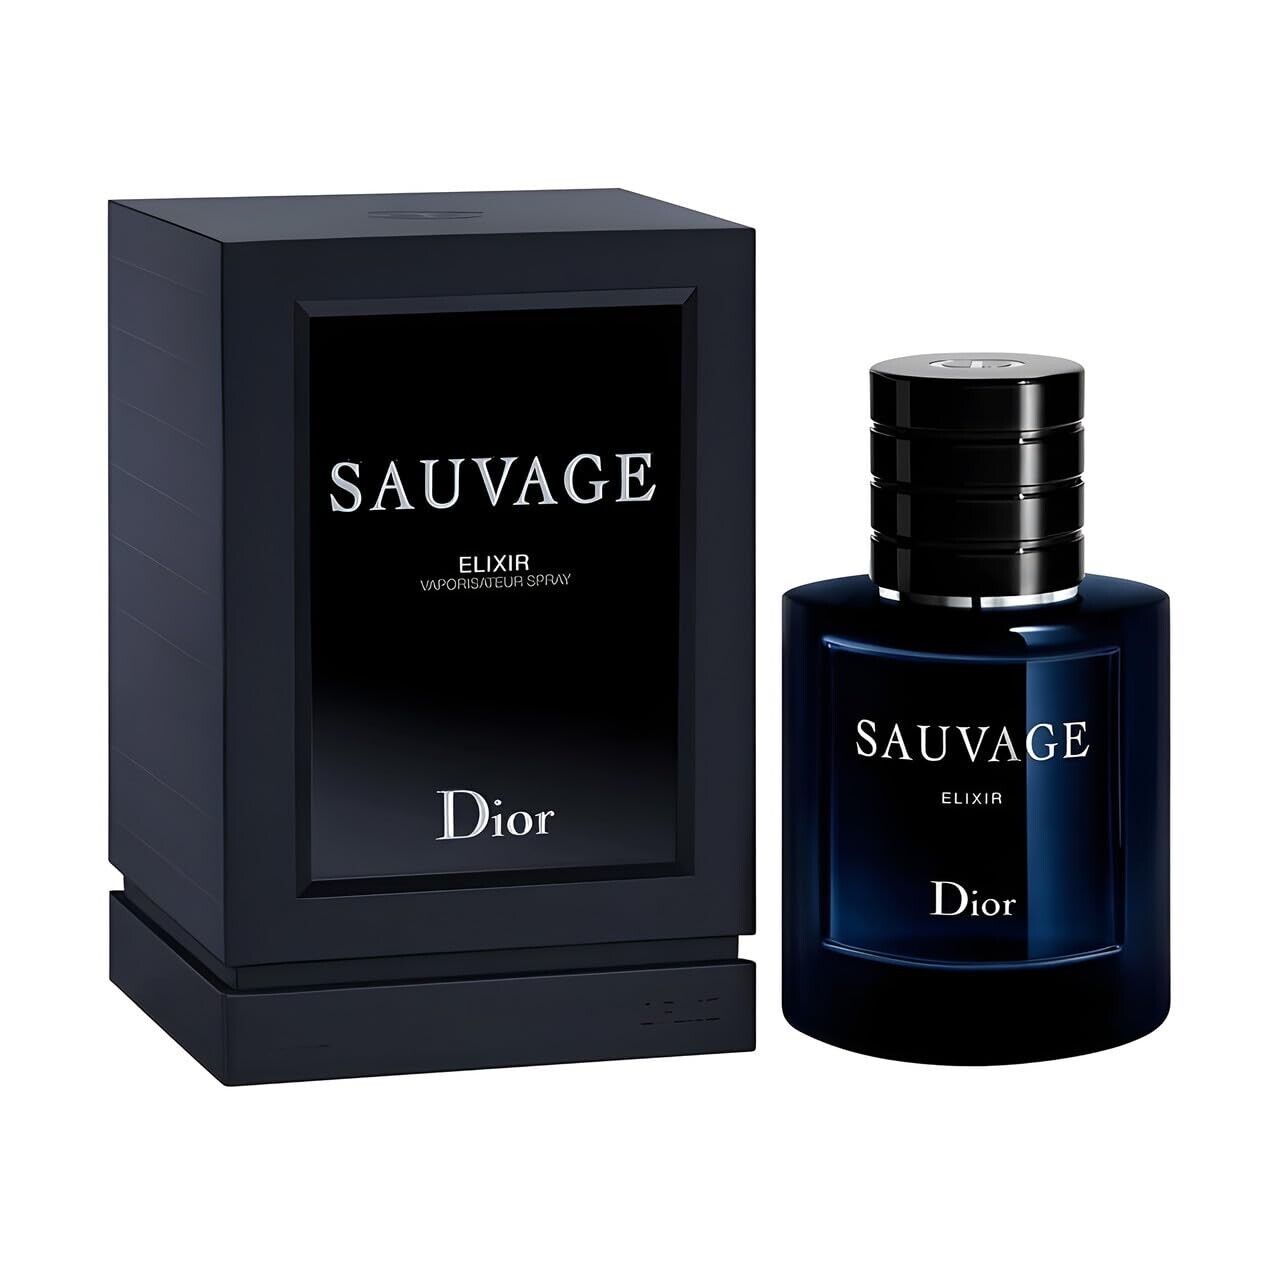 Dior Sauvage Elixir By Christian Dior 60 ml / 2 oz Cologne Spray For Men SEALED